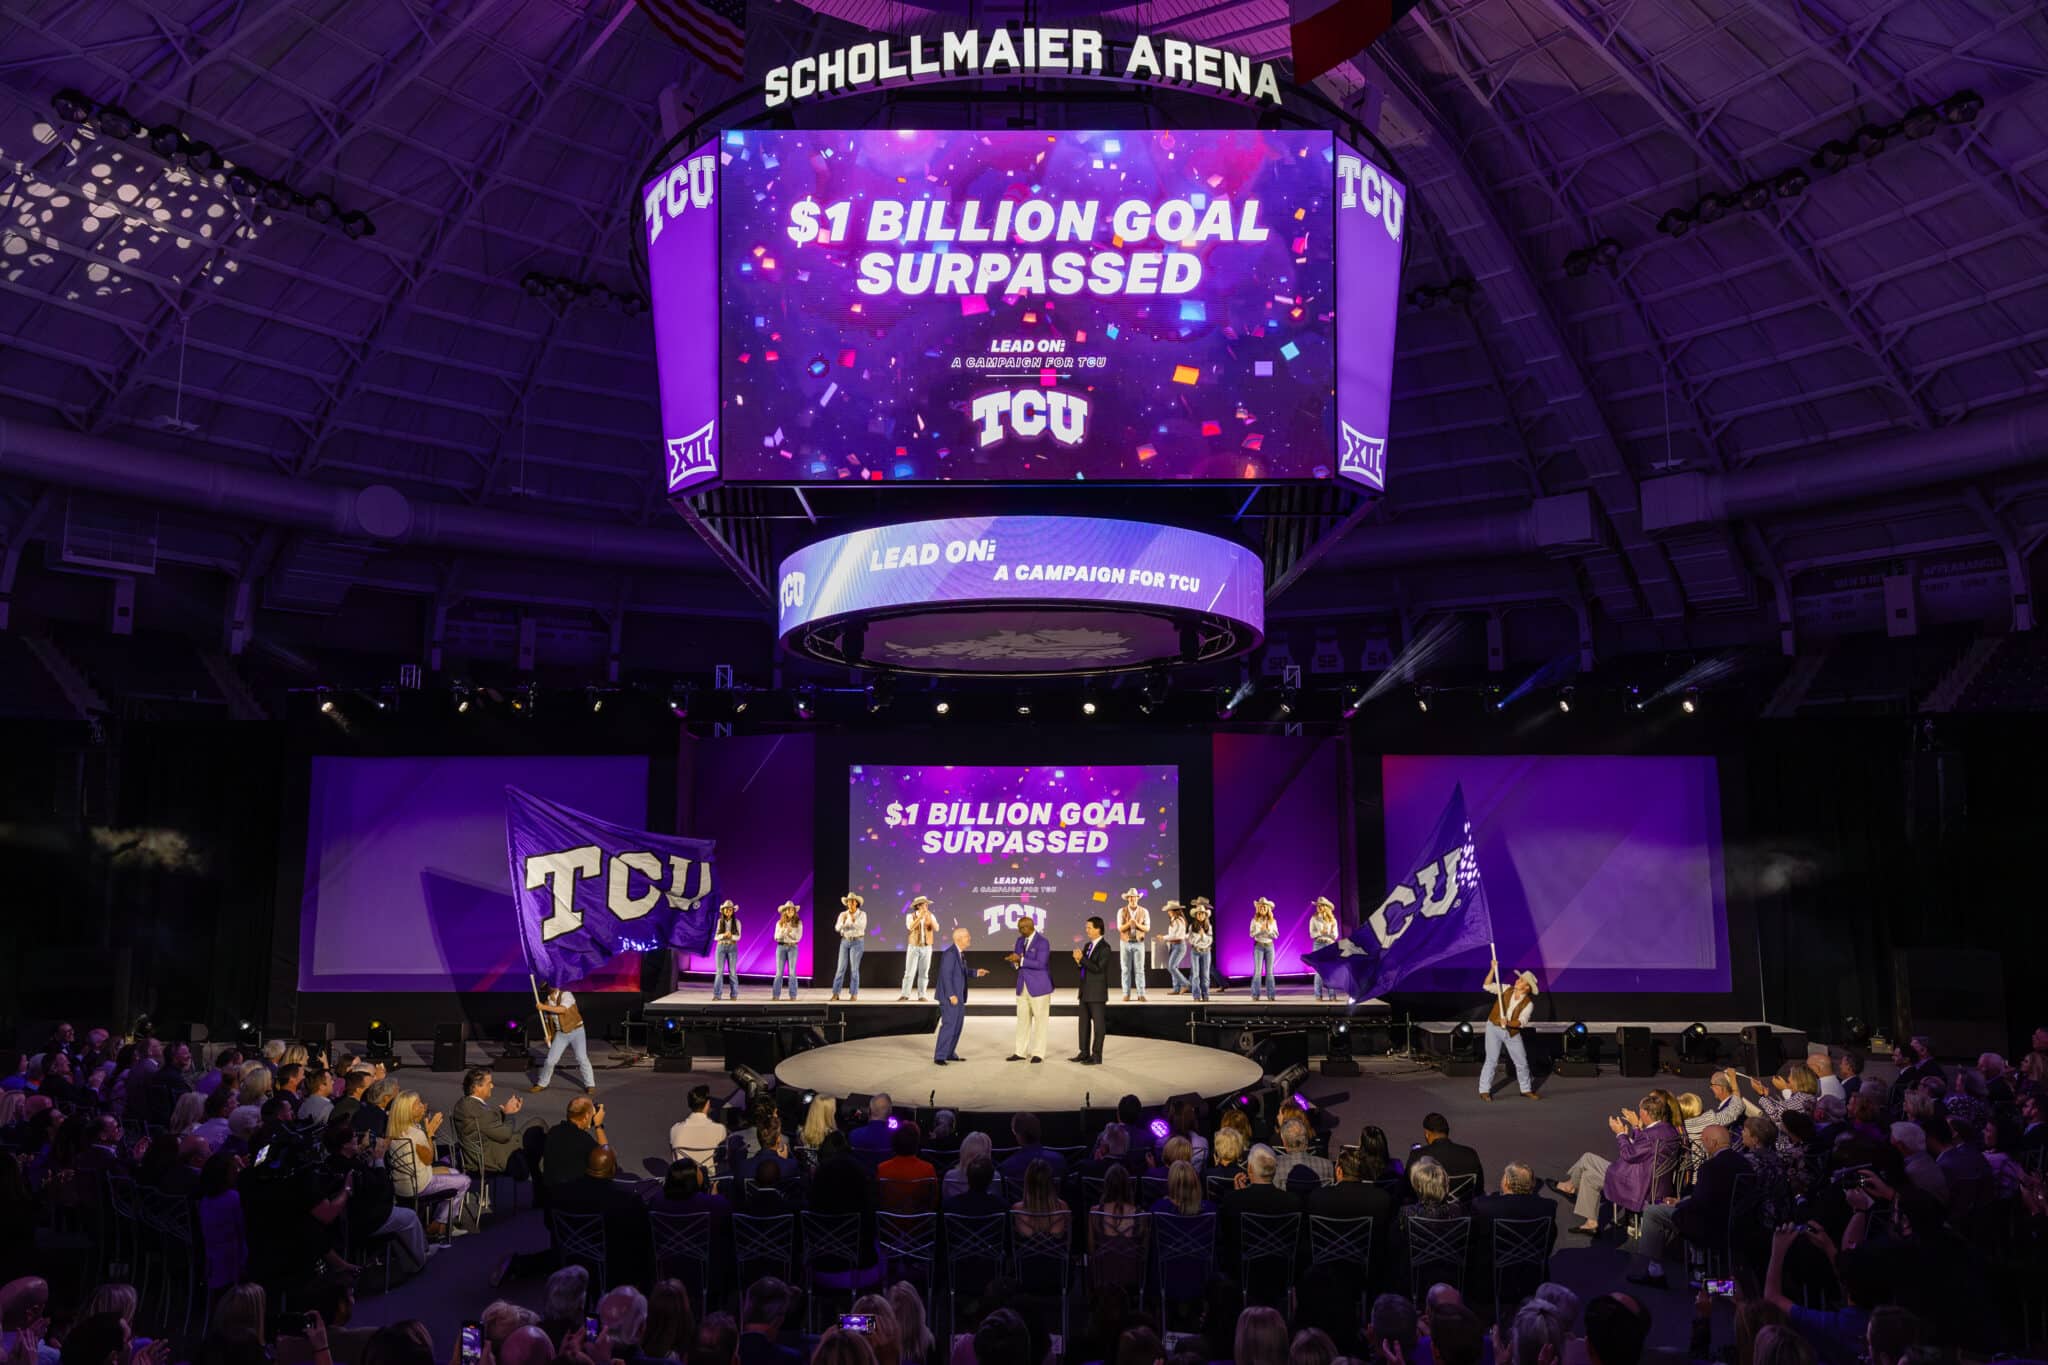 TCU donors, volunteers, alumni, and friends celebrate the university's Lead On fundraising campaign Thursday night. Photo courtesy of TCU